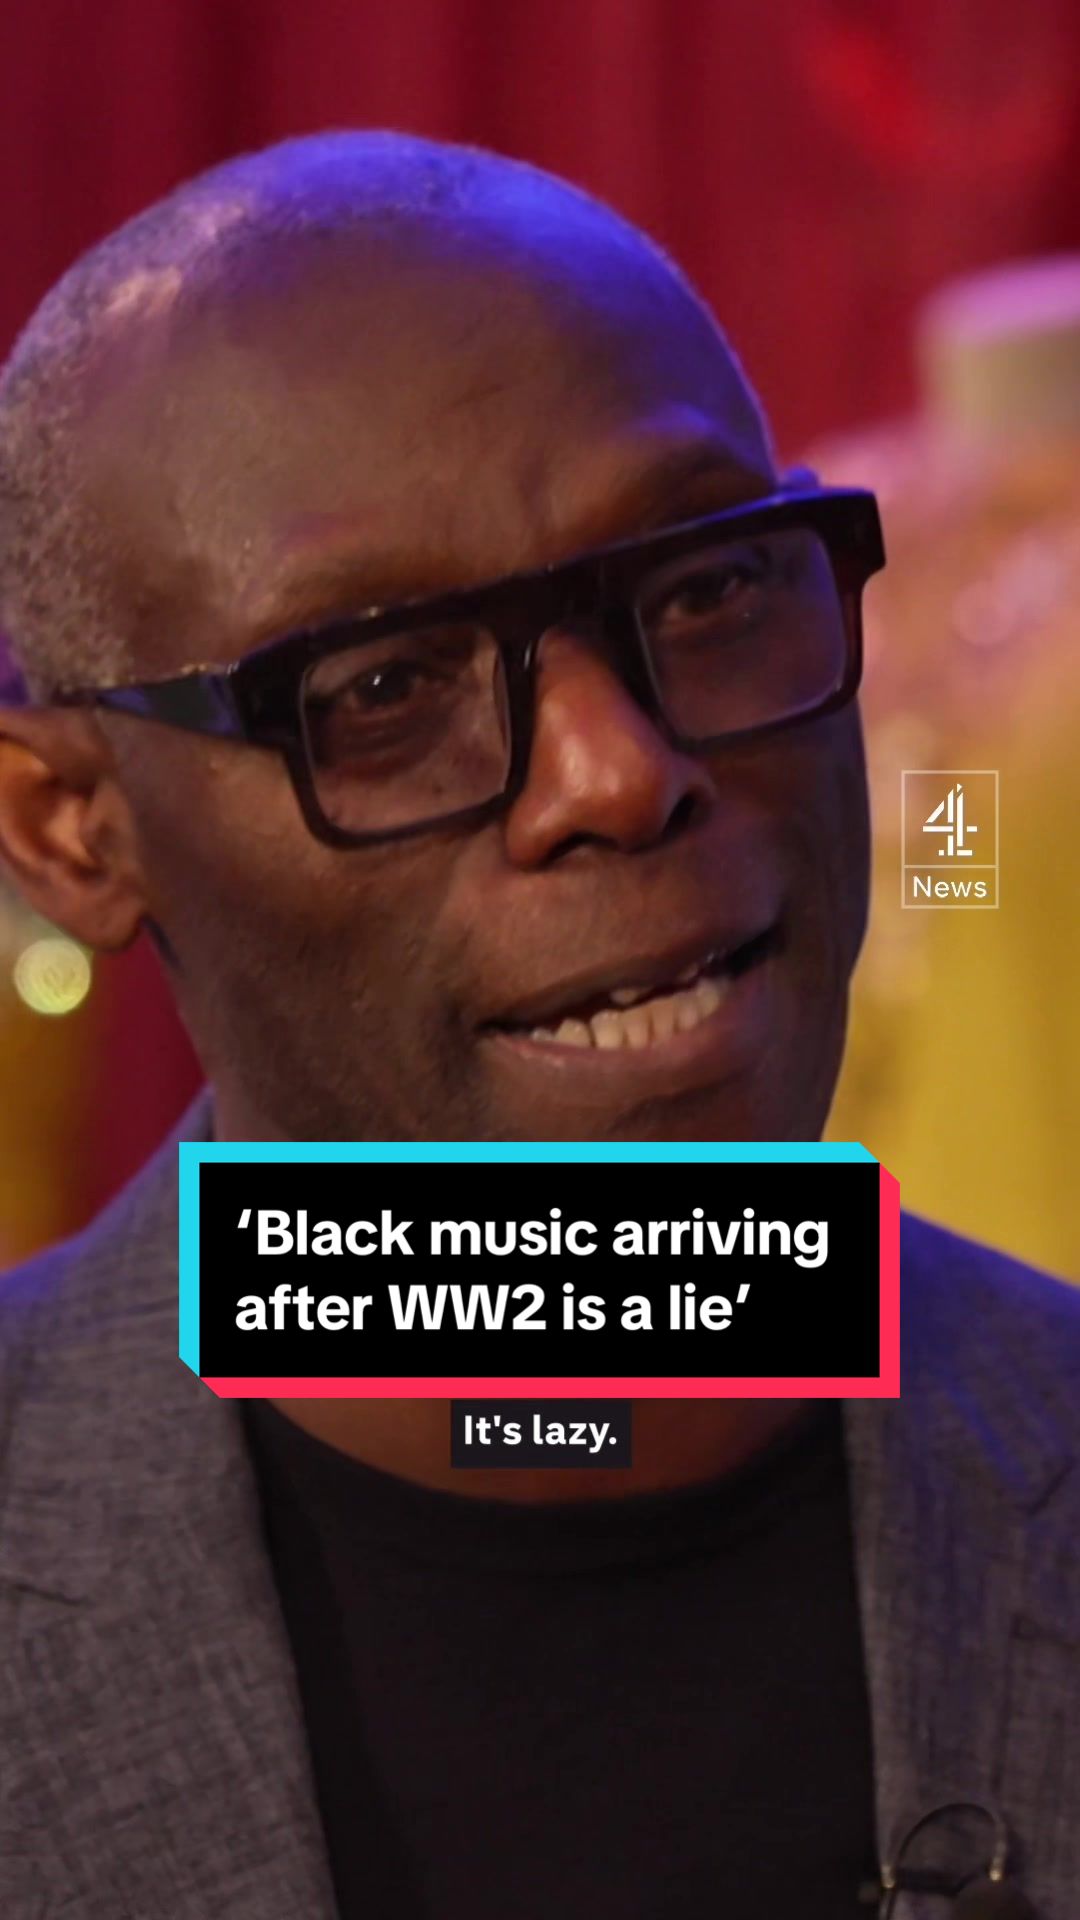 The first major exhibition documenting 500 years of Black music in Britain opens at the British Library and aims to challenge the timeline on when the Black presence in British music history began. Ayshah Tull spoke to pioneers of Black British music, including Nia Archives.  #blackmusic #britain #channel4news